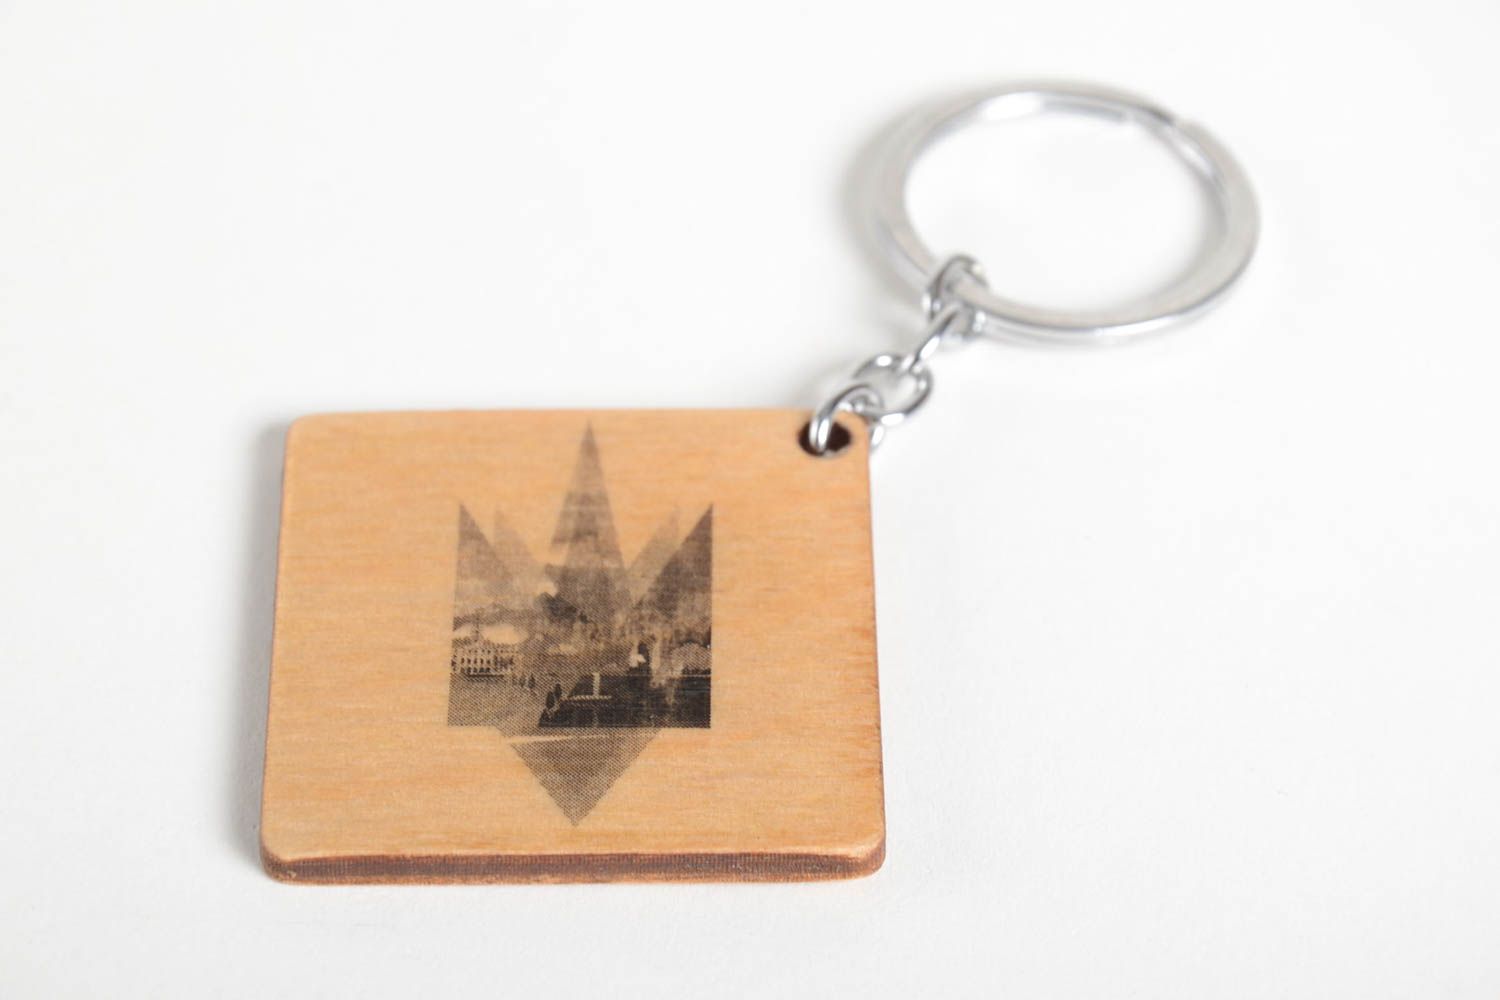 Homemade wooden keychain designer accessories key ring souvenir ideas cool gifts photo 3